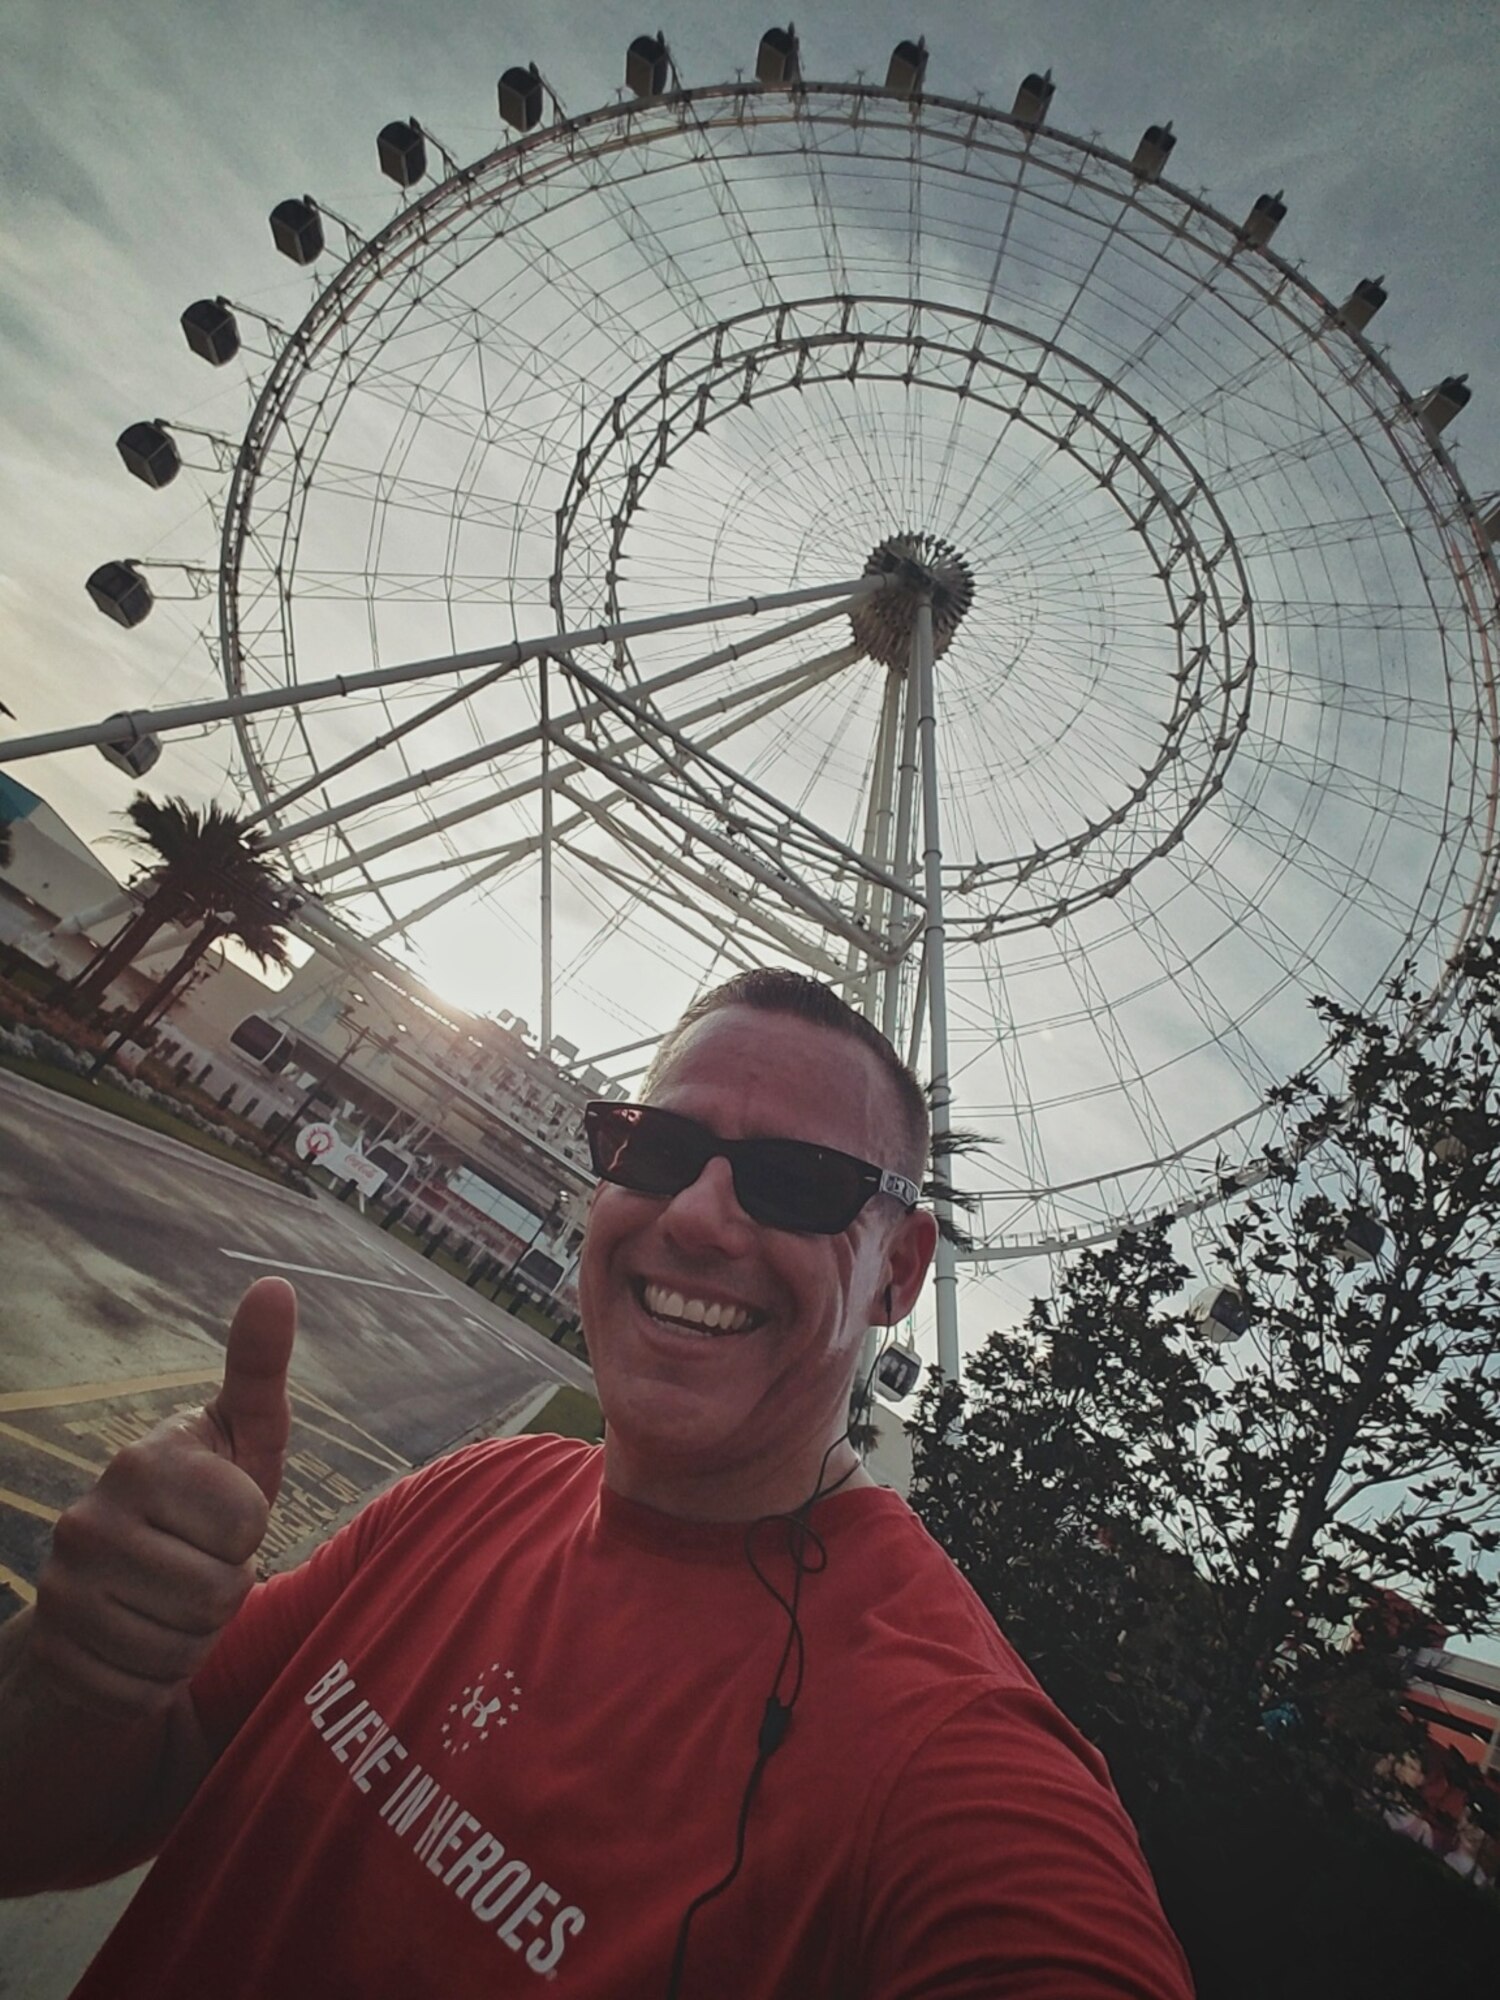 Christopher Parr, 932nd Airlift Wing Public Affairs specialist, grabs a quick "selfie" with the Orlando Eye in the background, while in Florida for the Air Force Association's Air Warfare Symposium.  Despite traveling to vacation destinations, Parr said he needed to get in his runs for the Scott Health Promotion Running Clinic. You can follow along as Parr documents his journey to becoming a better runner in the commentaries section of the 932nd AW website. http://www.932aw.afrc.af.mil/News/Commentaries.aspx (U.S. Air Force photo by Christopher Parr)